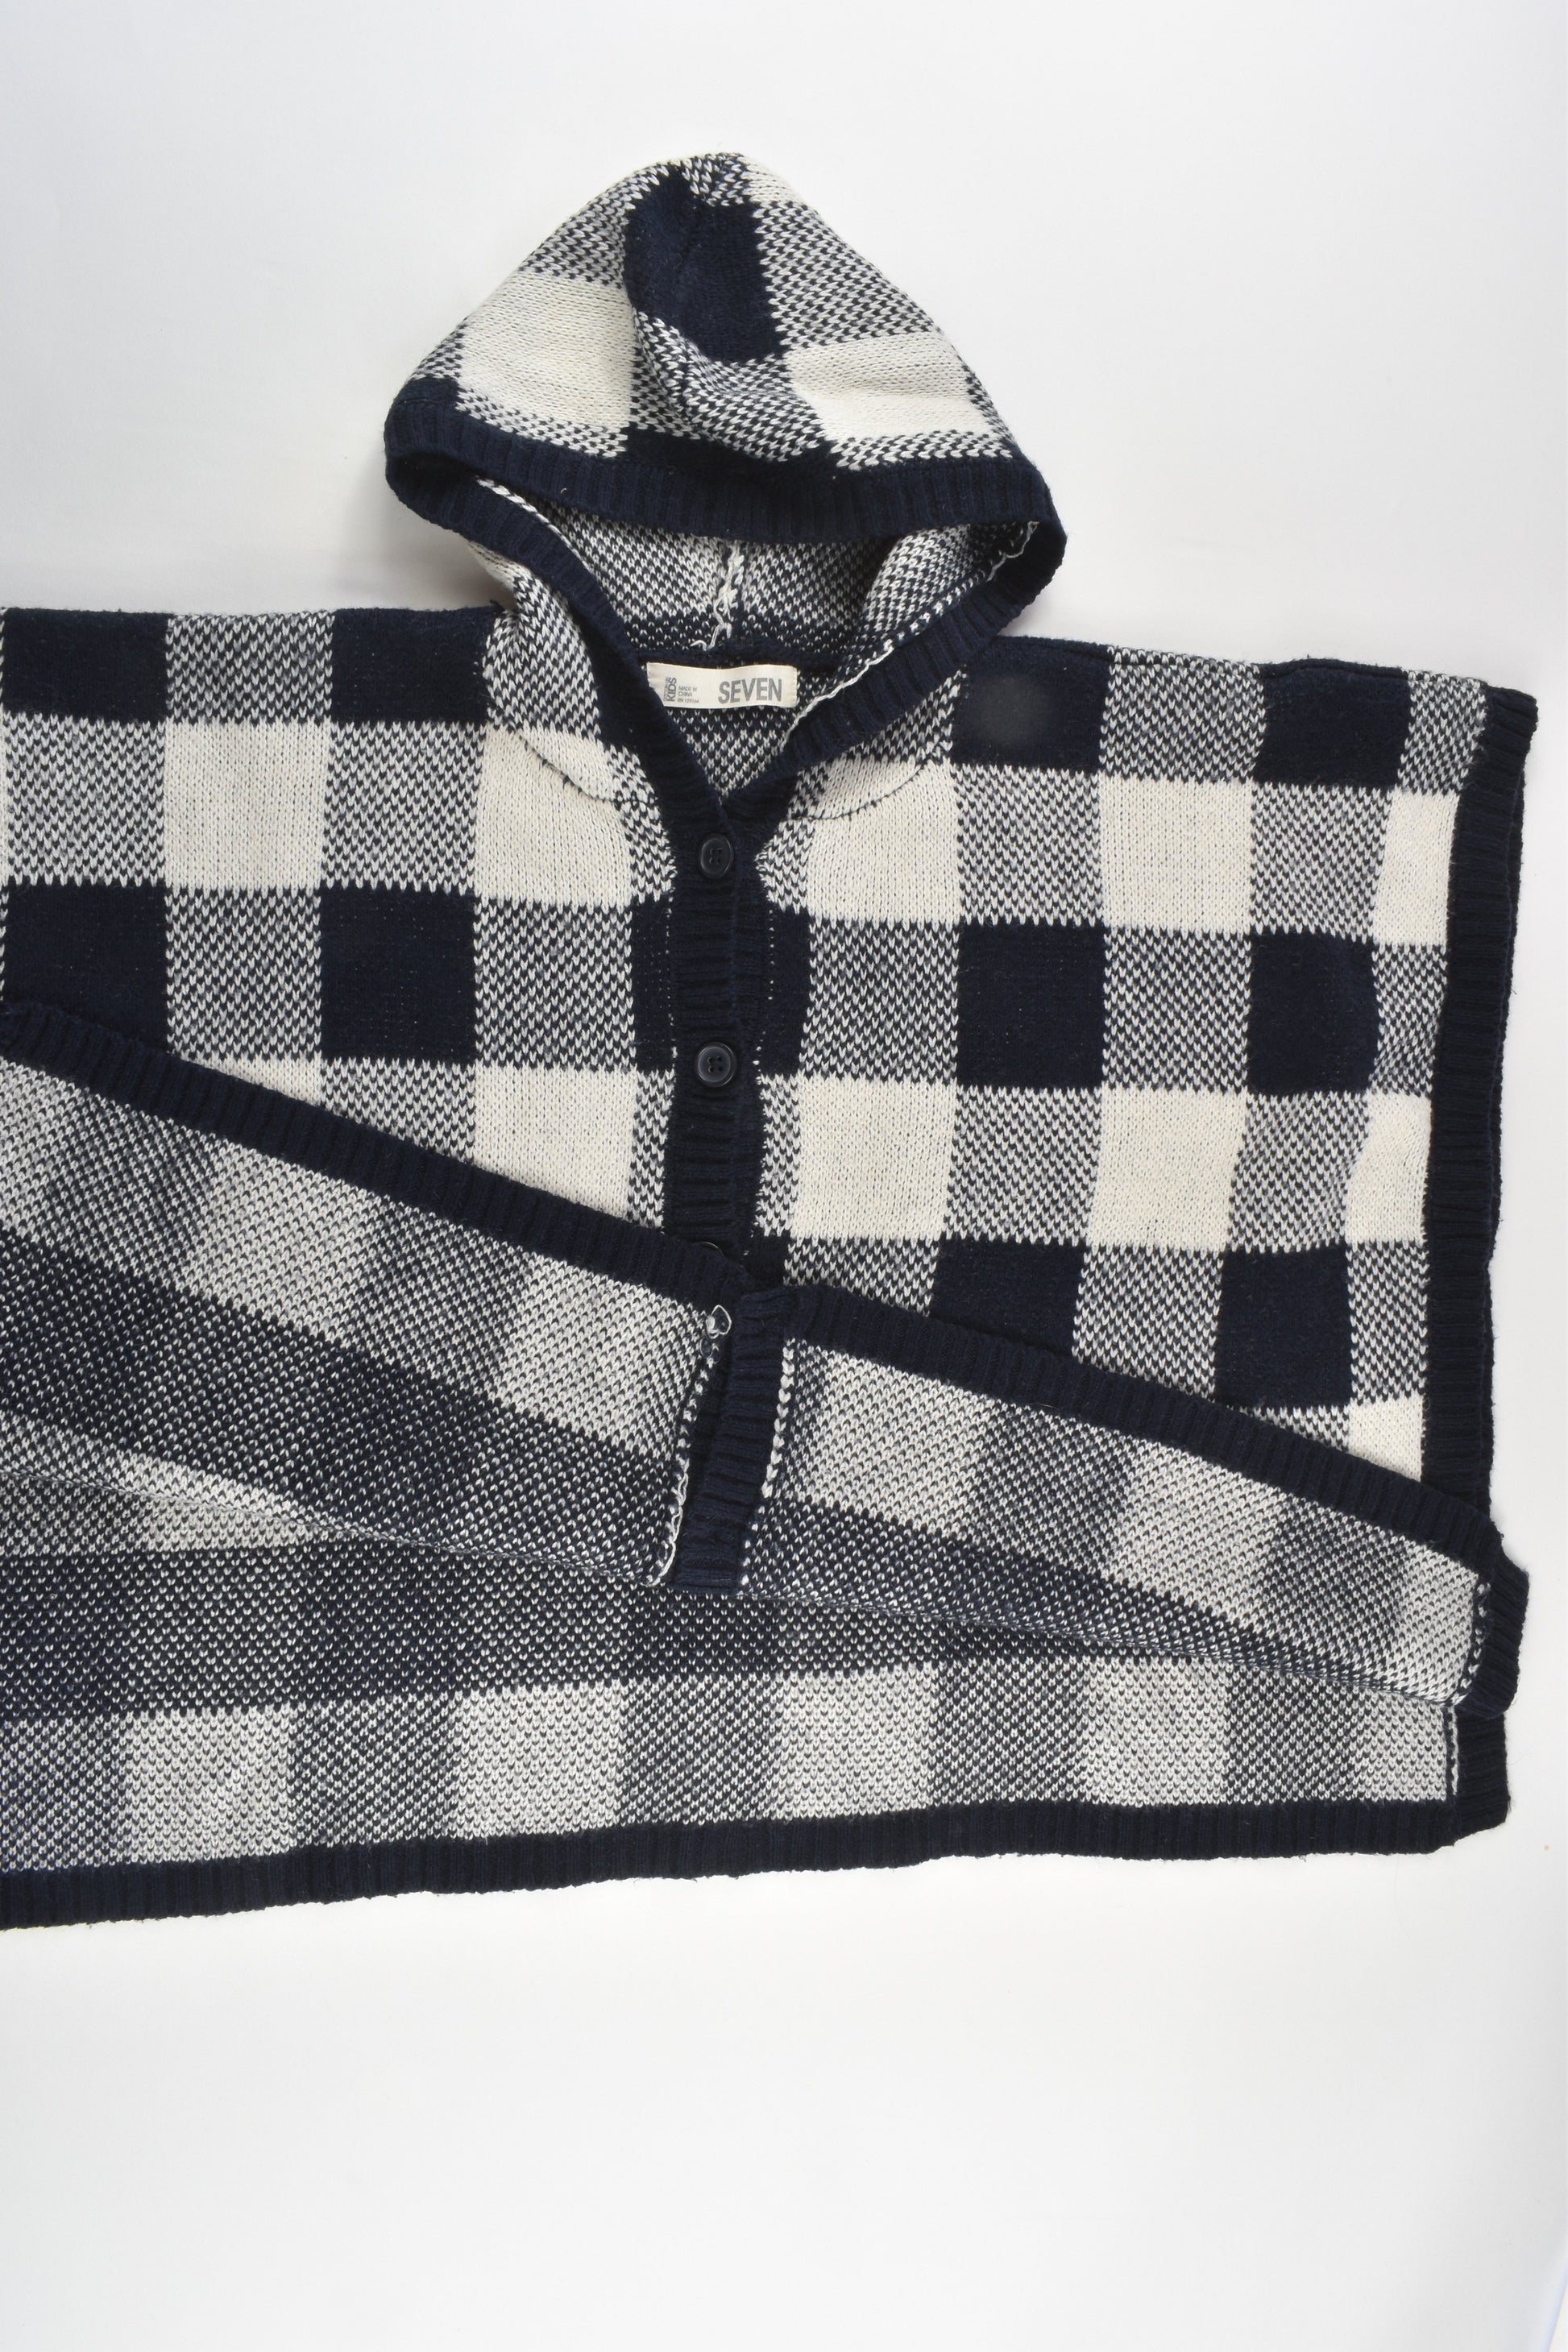 Cotton On Kids Size 7 Acrylic/Wool Checked Poncho